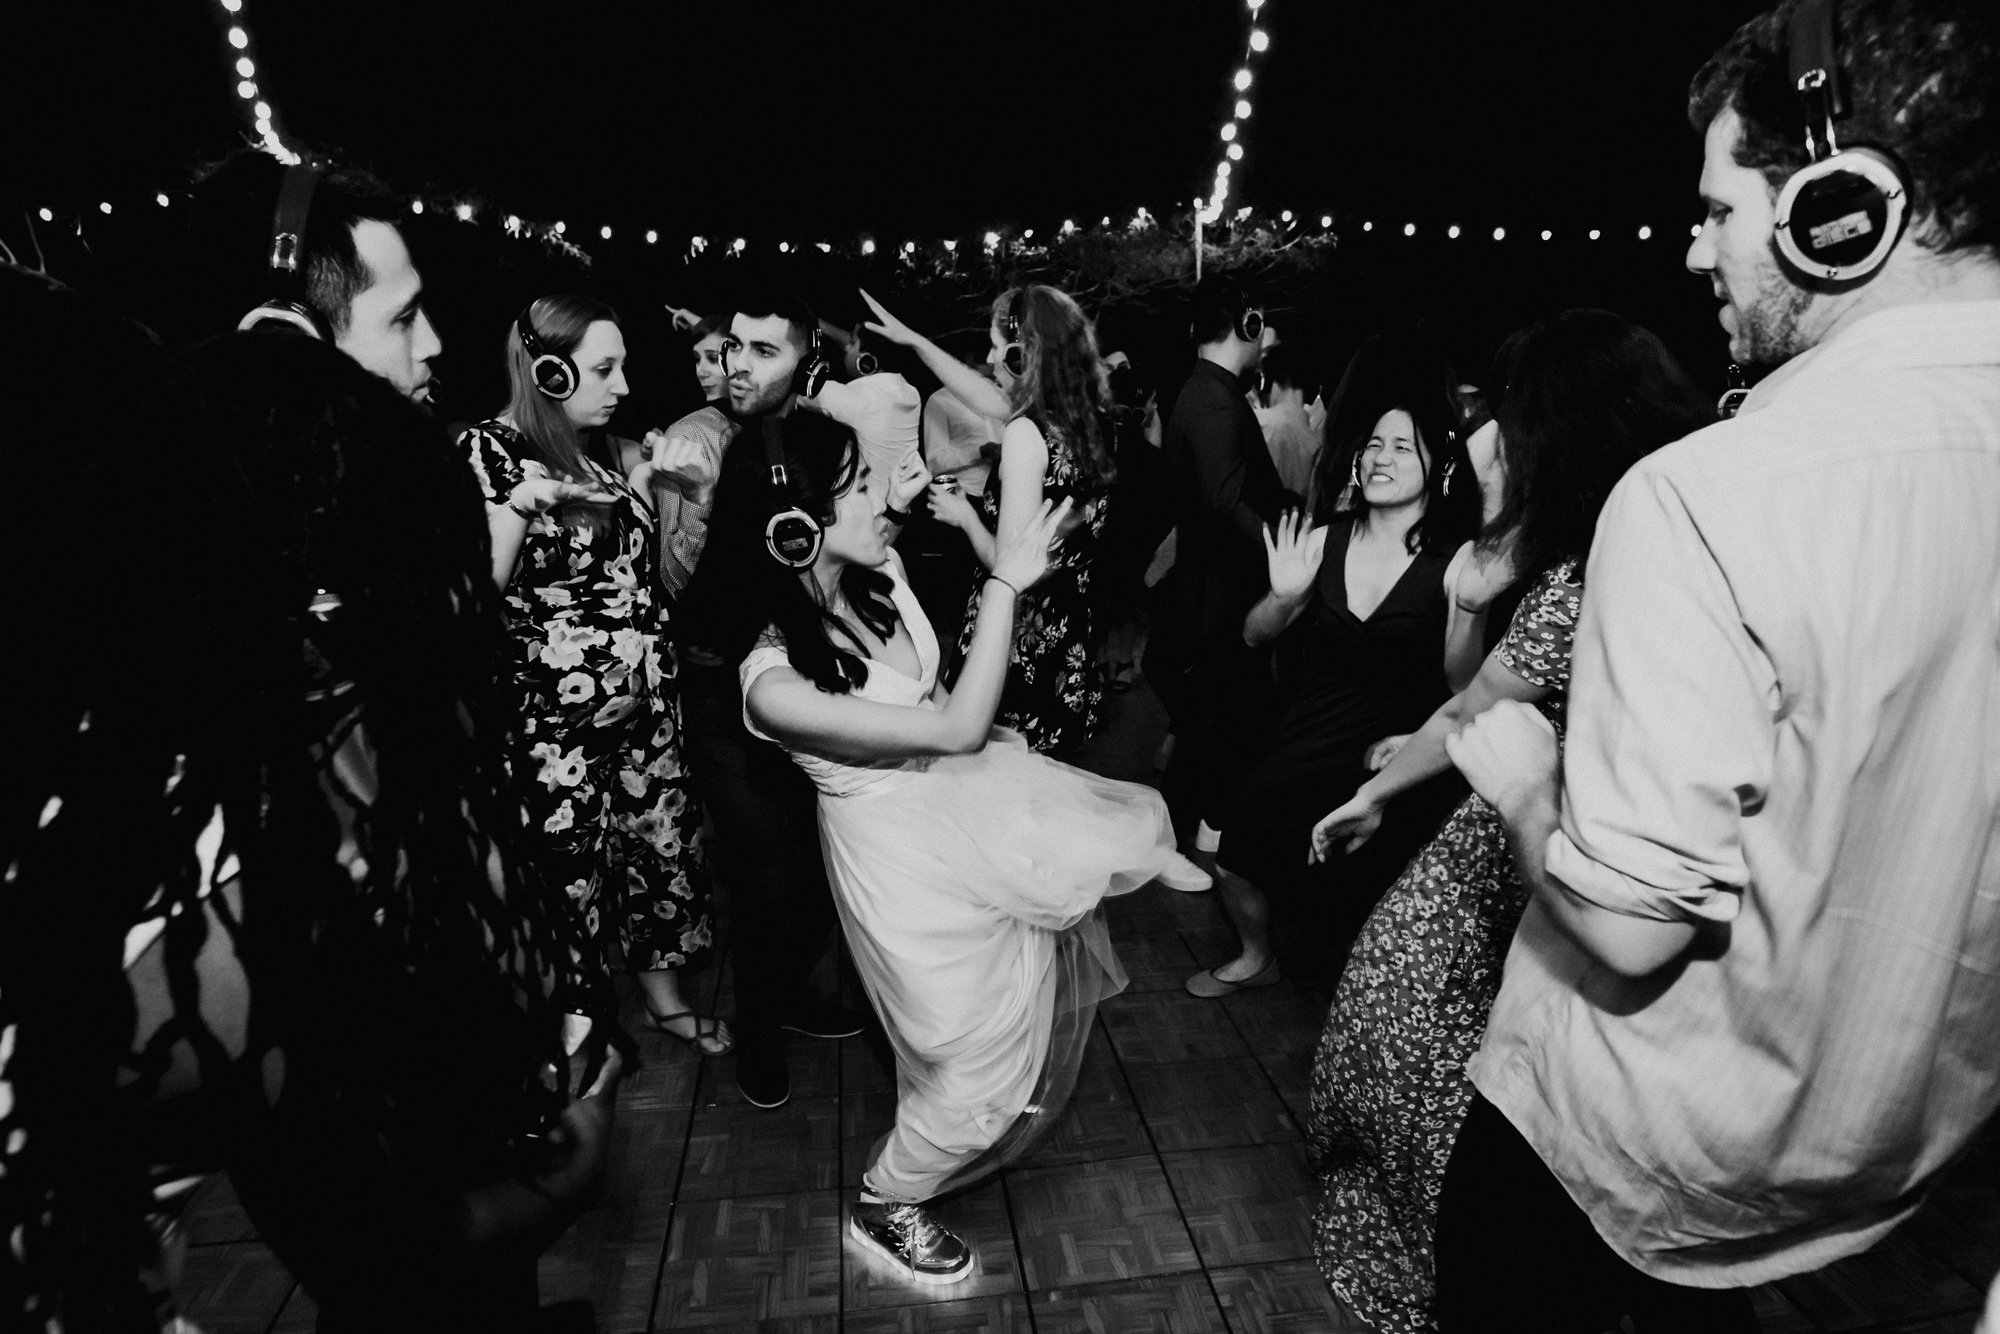 Saguaro Lake Guest Ranch The Perfect Location for a Laid-Back Fun-Filled Wedding. The best documentary wedding photographer Mantas Kubilinskas-94.jpg